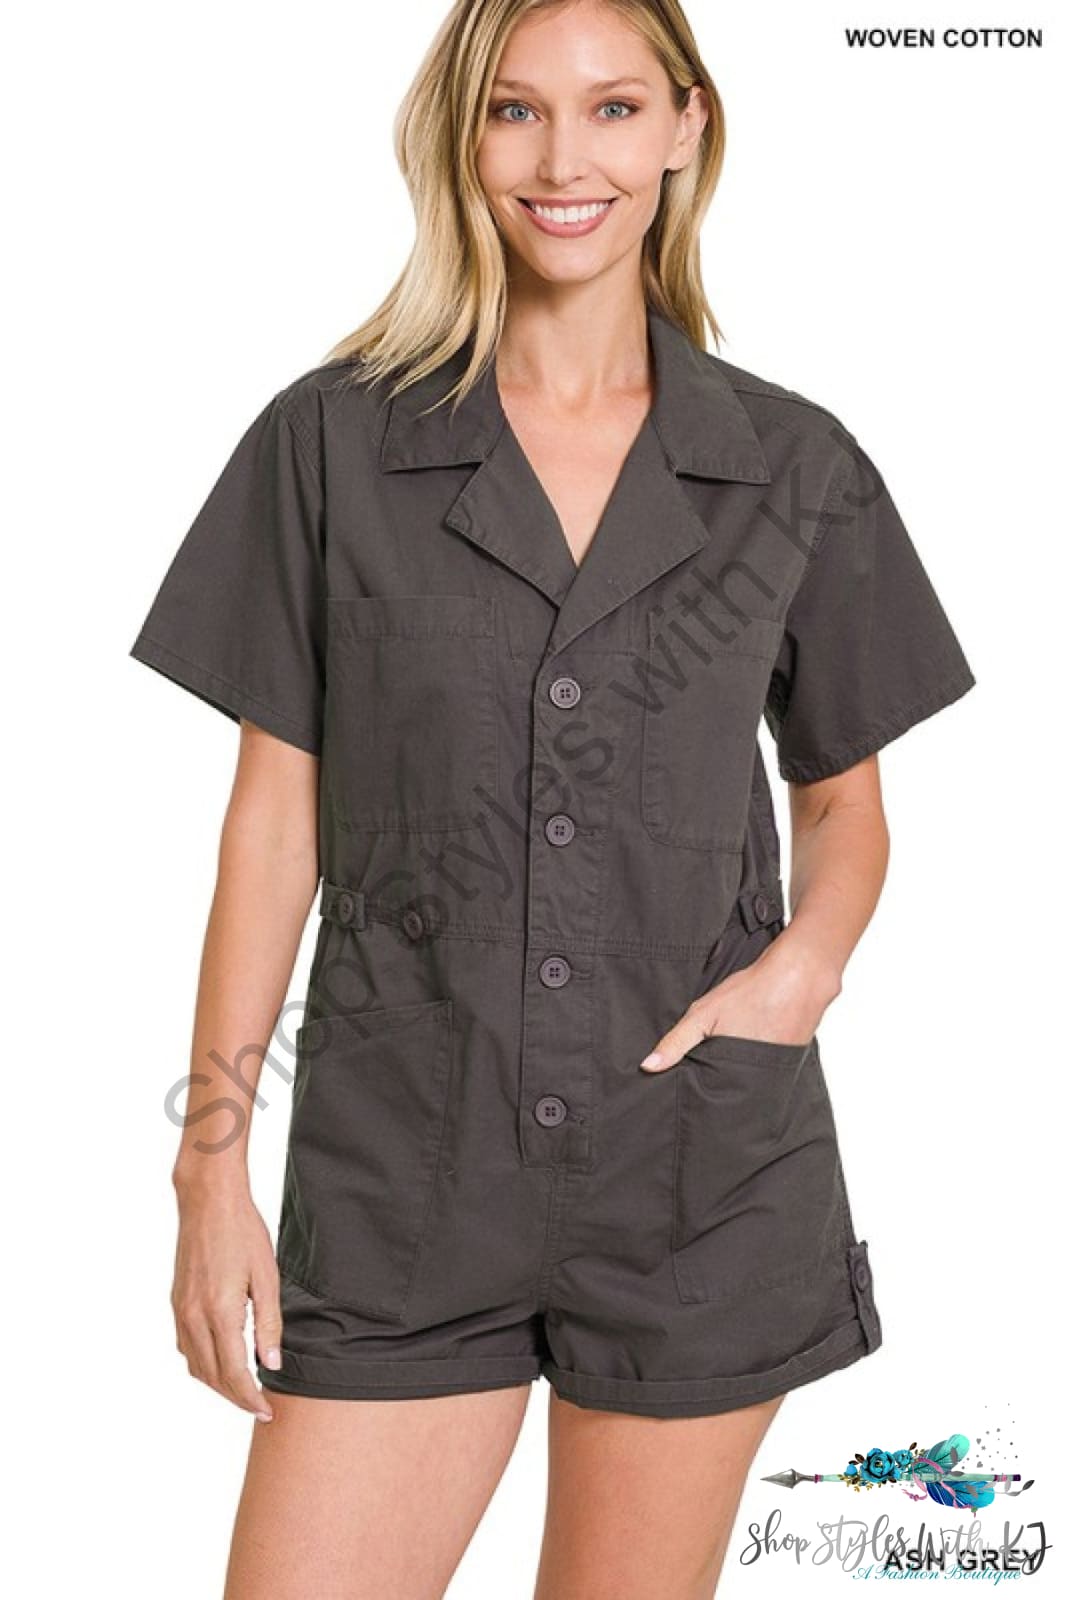 Imani Woven Cotton Button Front Shirt Romper Ash Grey / S Rompers